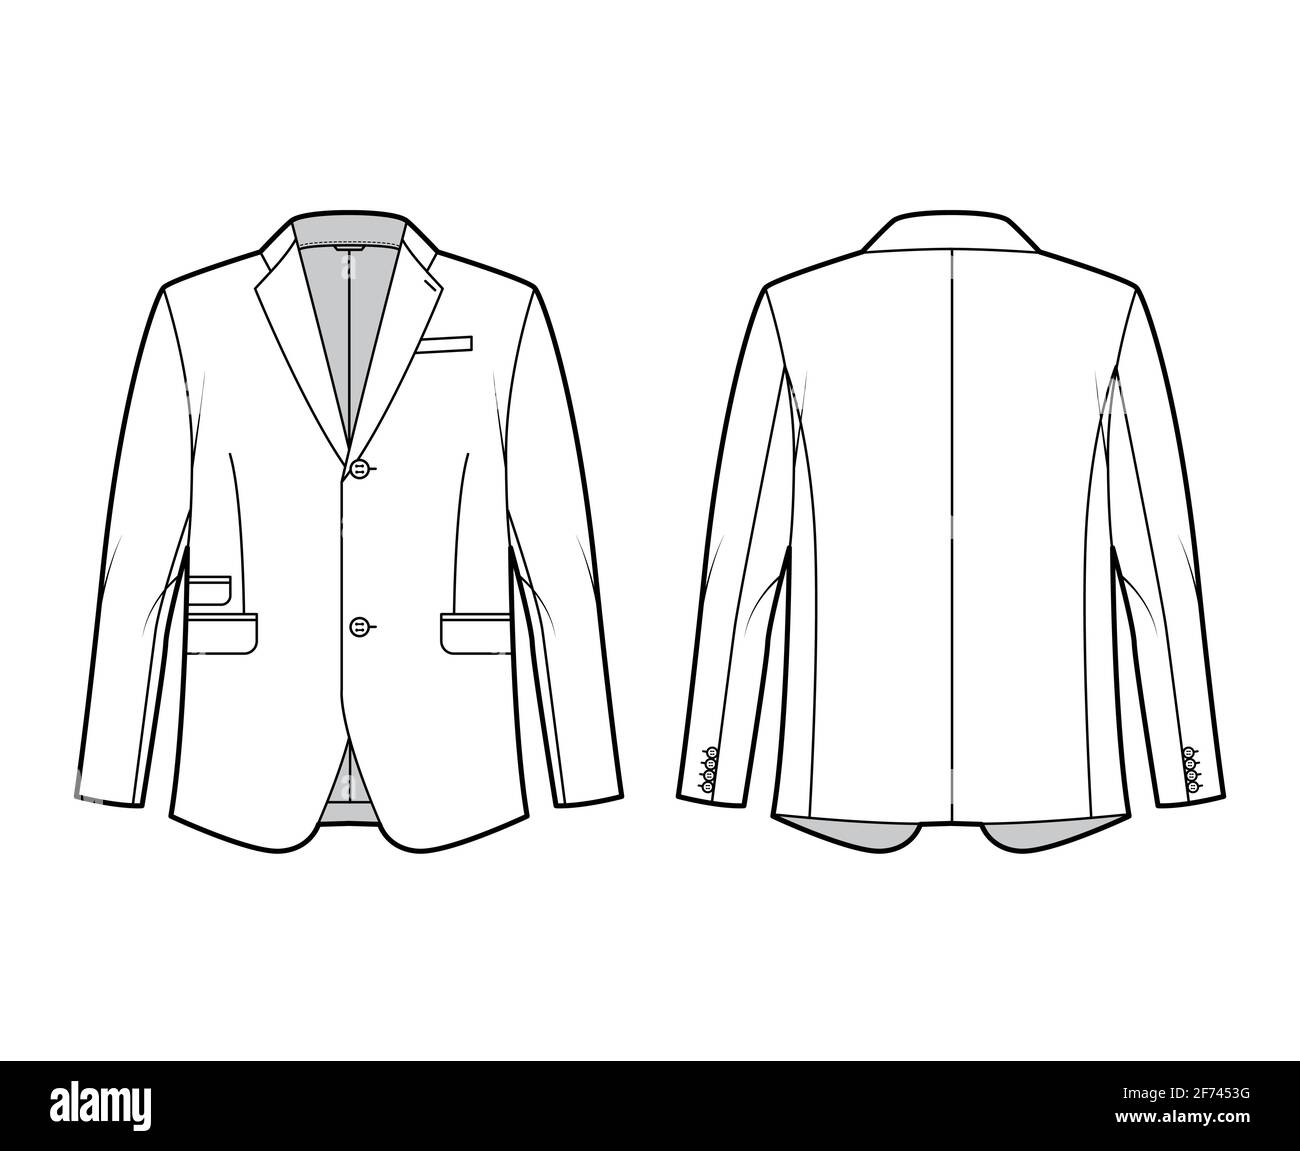 Tailored jacket lounge suit technical fashion illustration with long ...